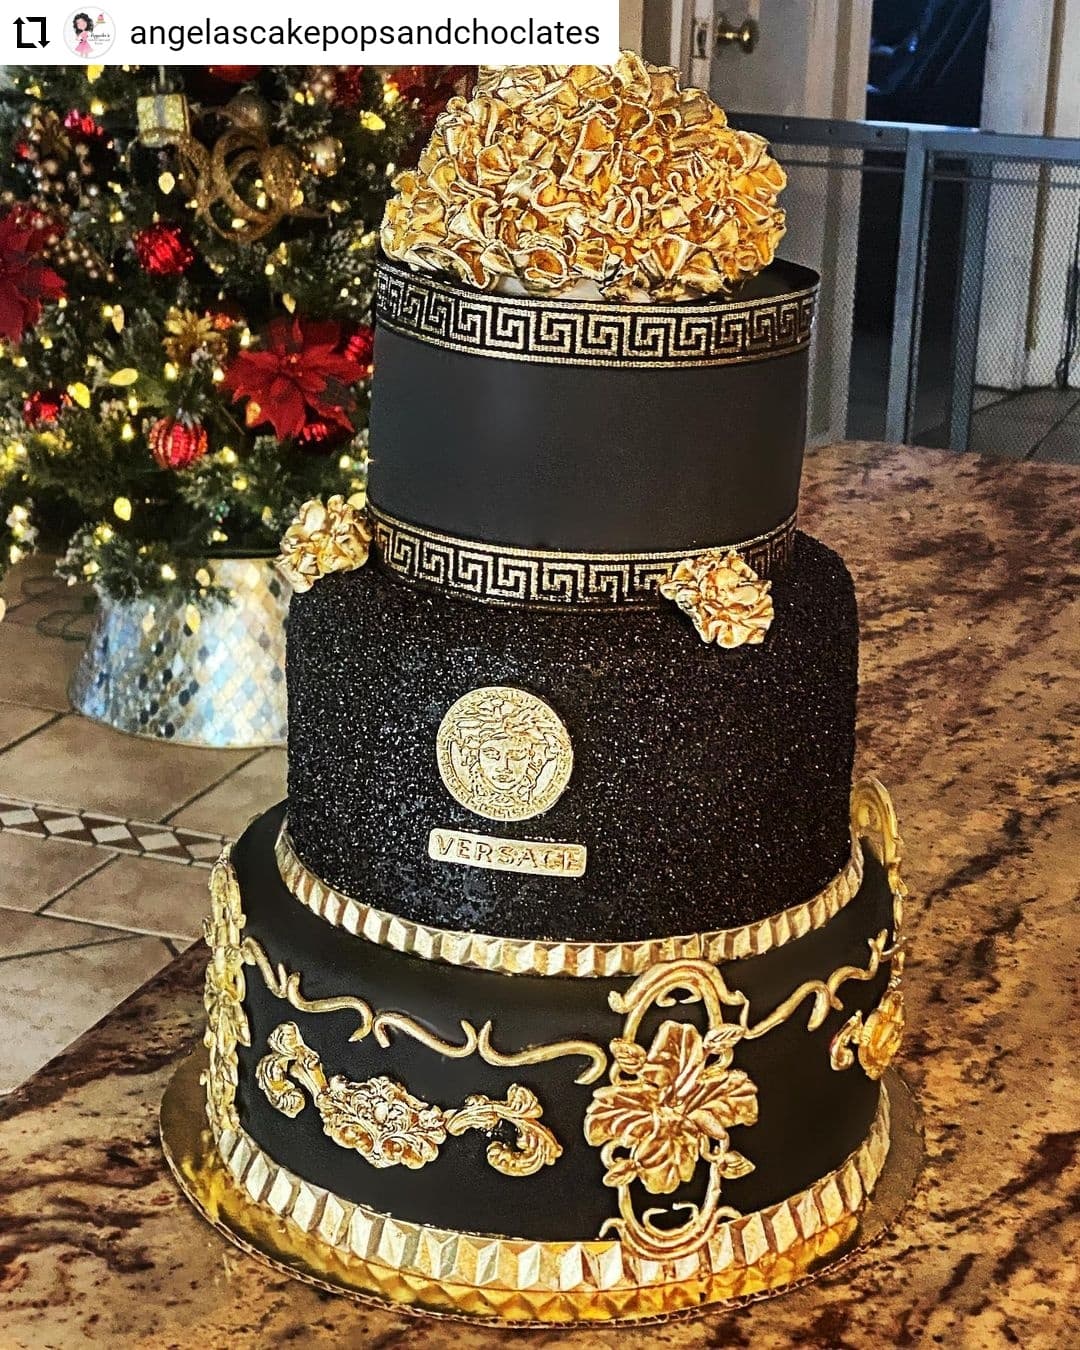 How to make a simple versace fondant cake - YouTube